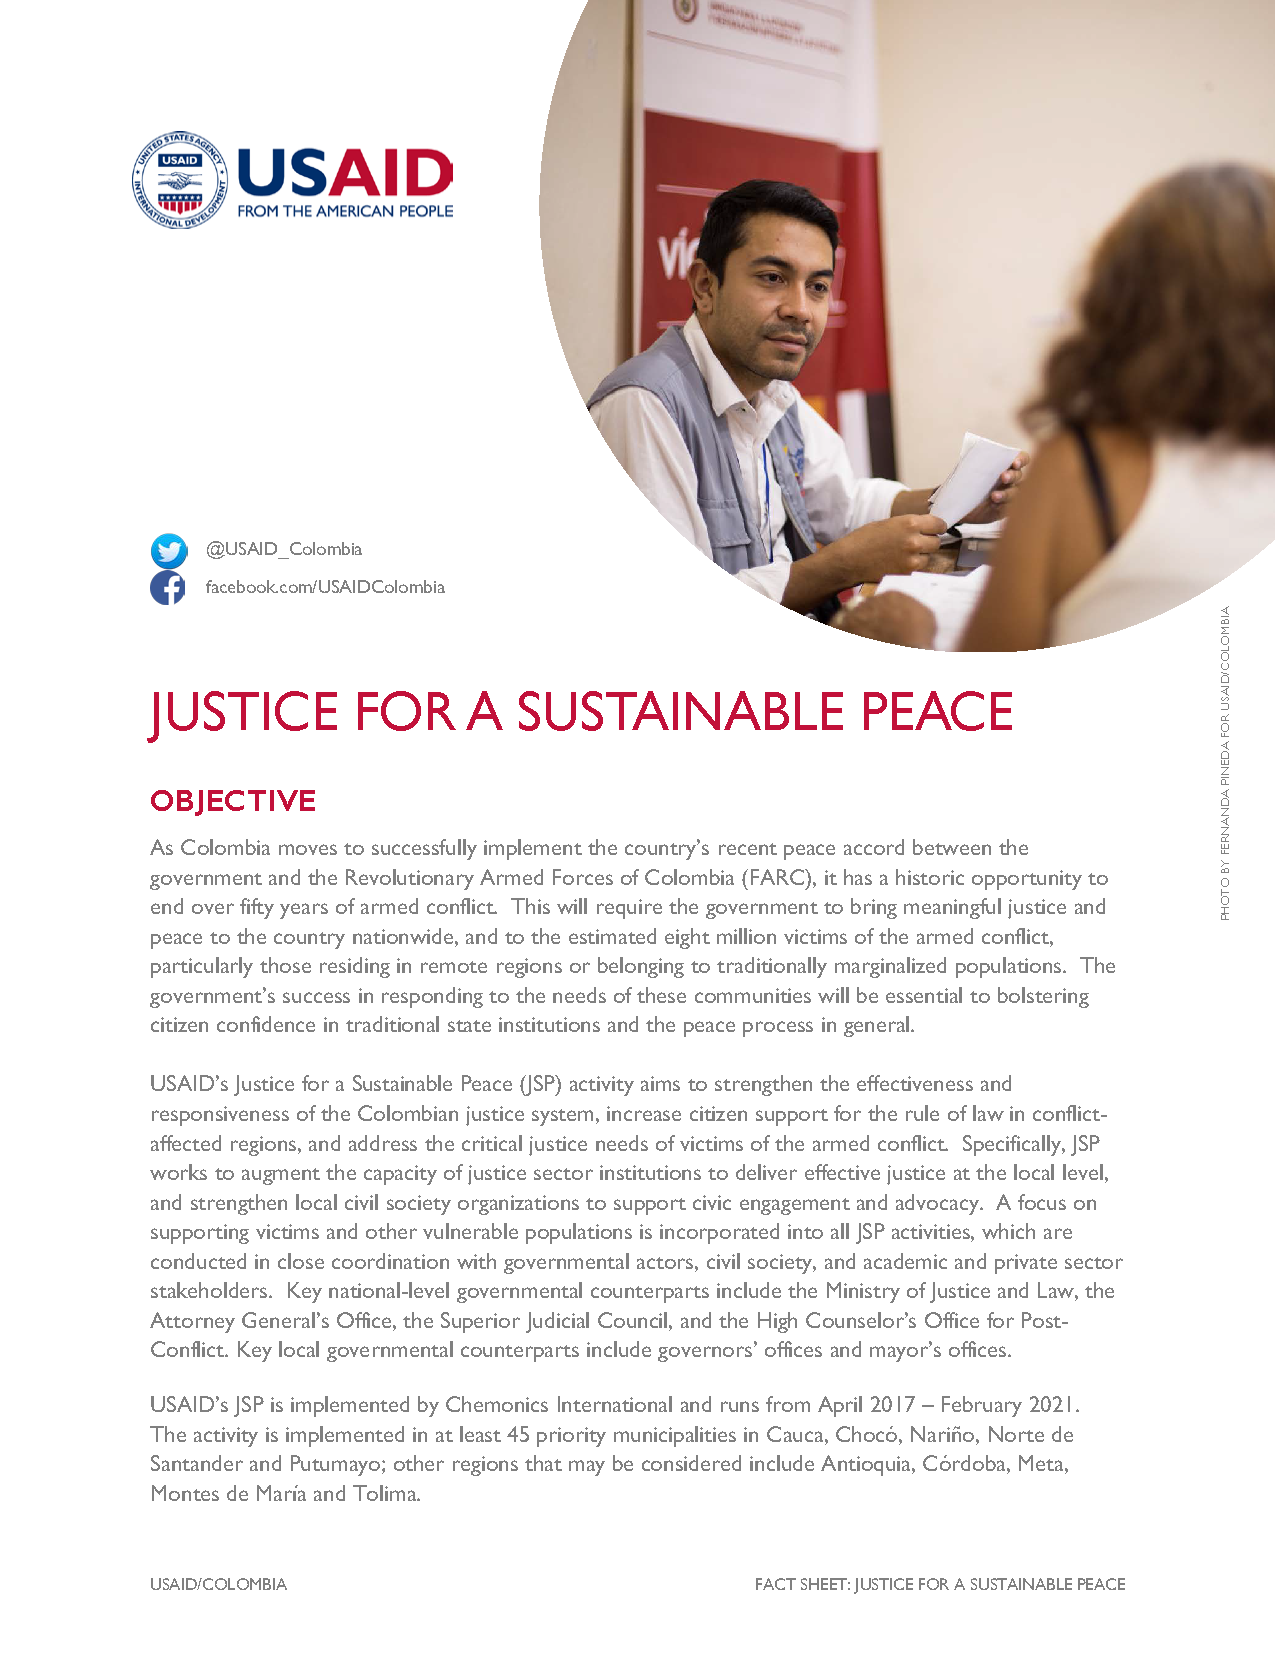 Justice for a Sustainable Peace (JSP)